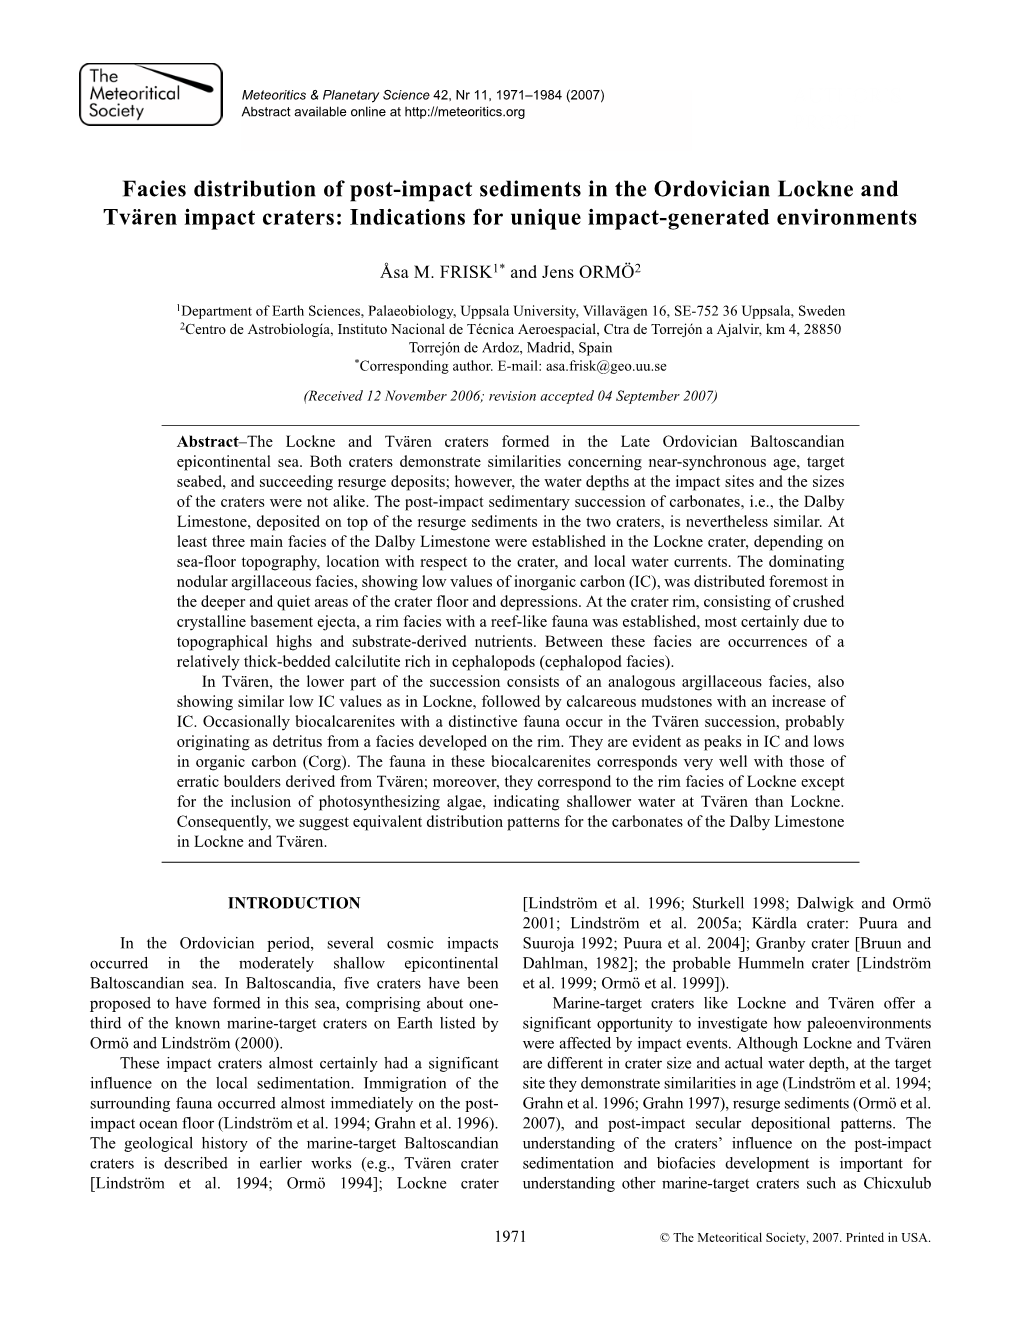 Facies Distribution of Post-Impact Sediments in the Ordovician Lockne and Tvären Impact Craters: Indications for Unique Impact-Generated Environments